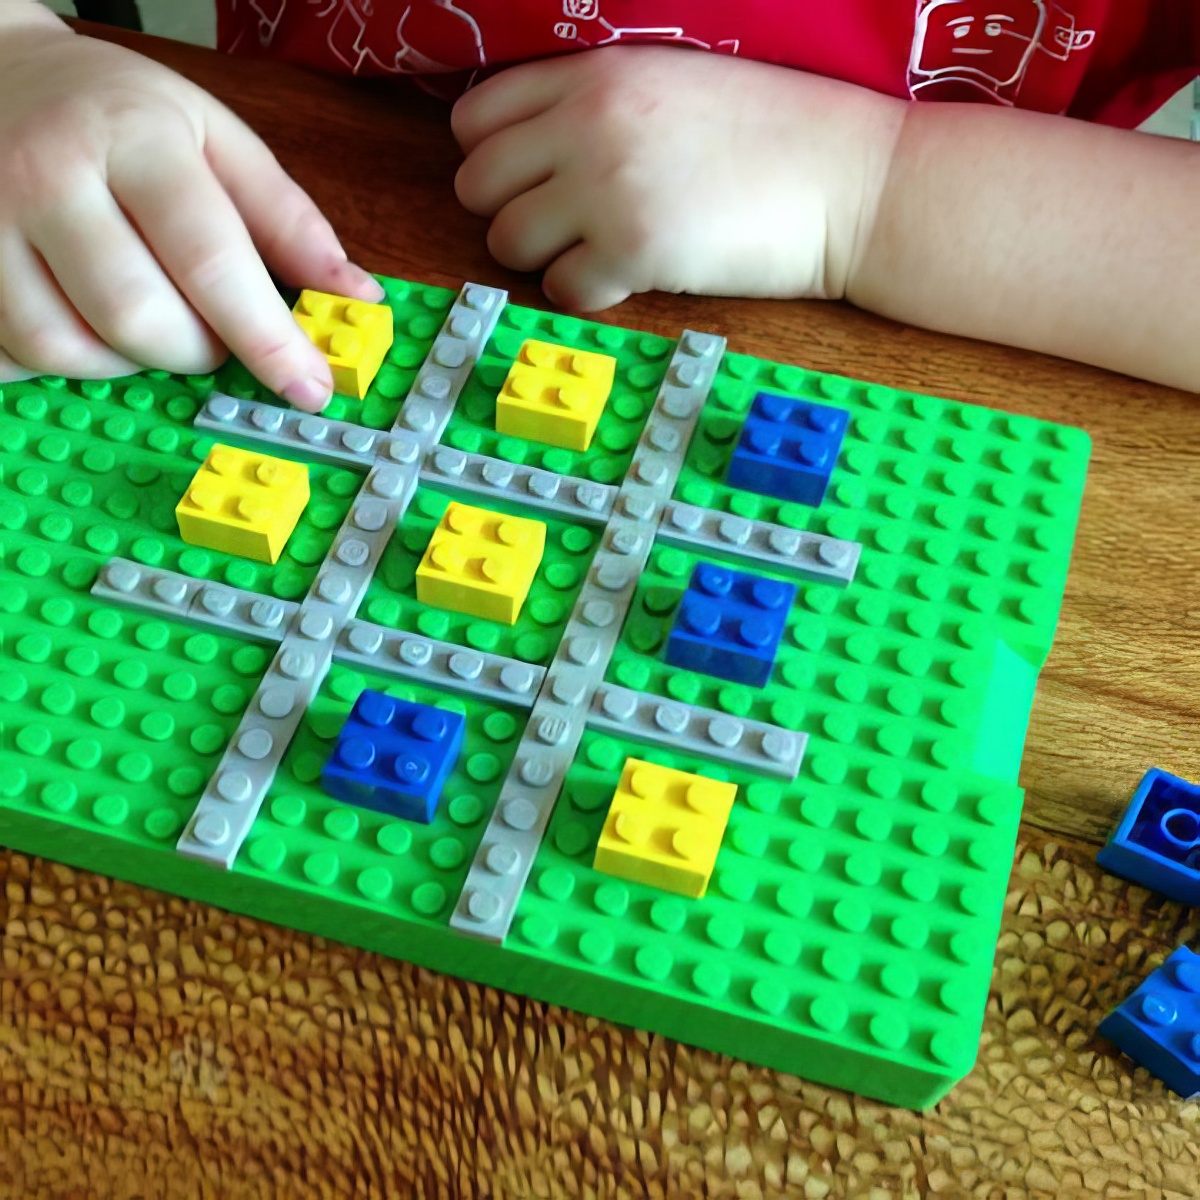 Lego-Tic-Tac-Toe-game, lego game, boredom buster activities for 4-year-olds